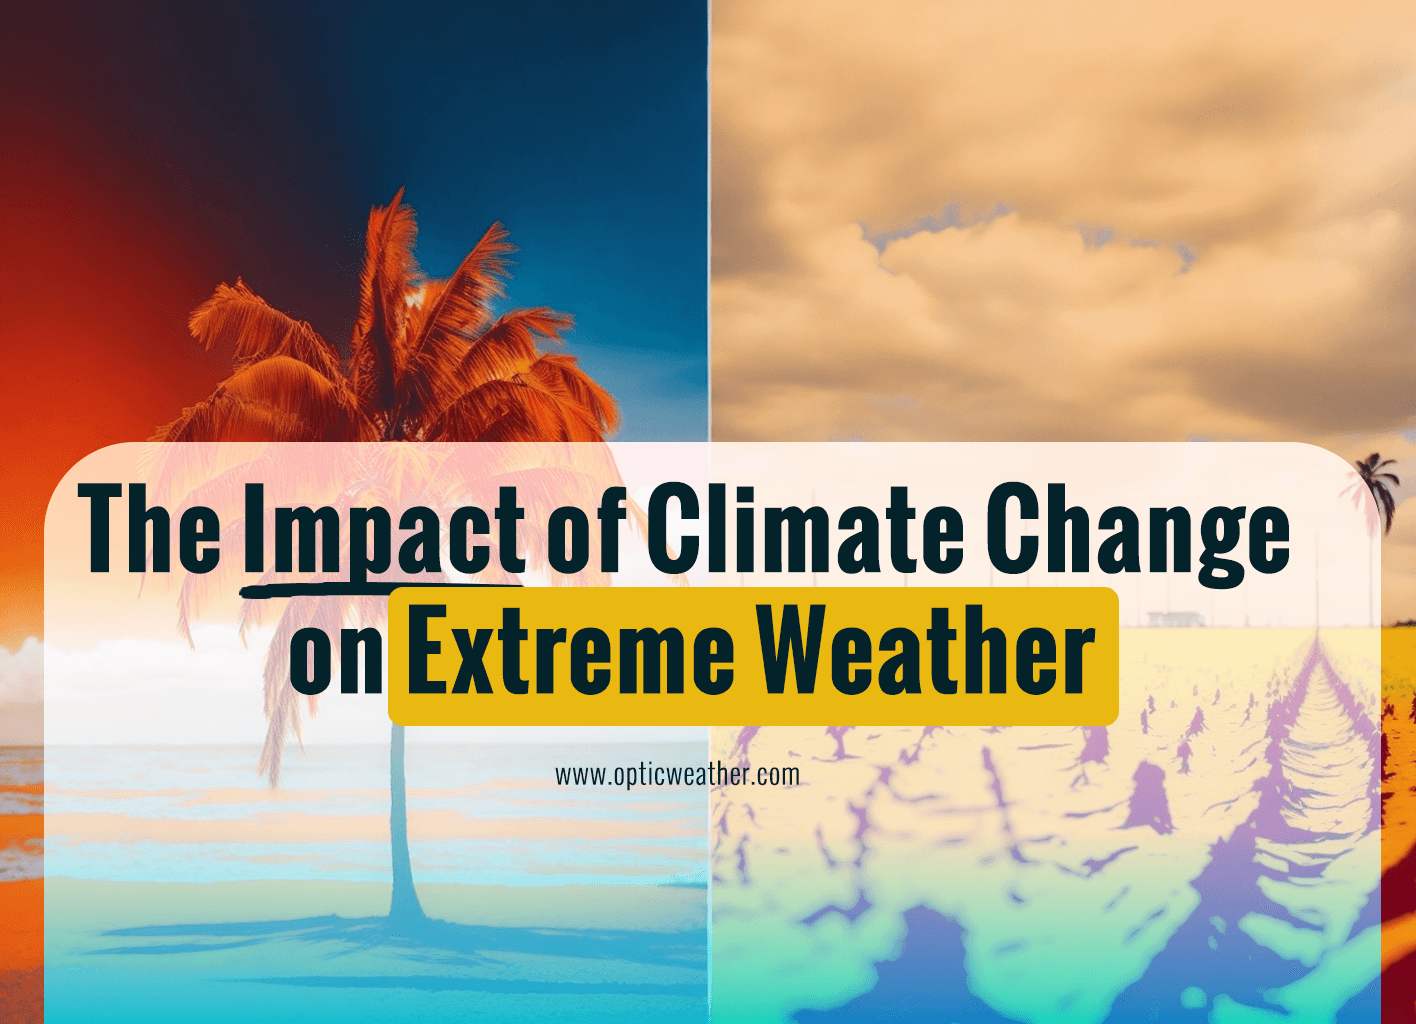 Understanding the Link between Climate Change and Extreme Weather